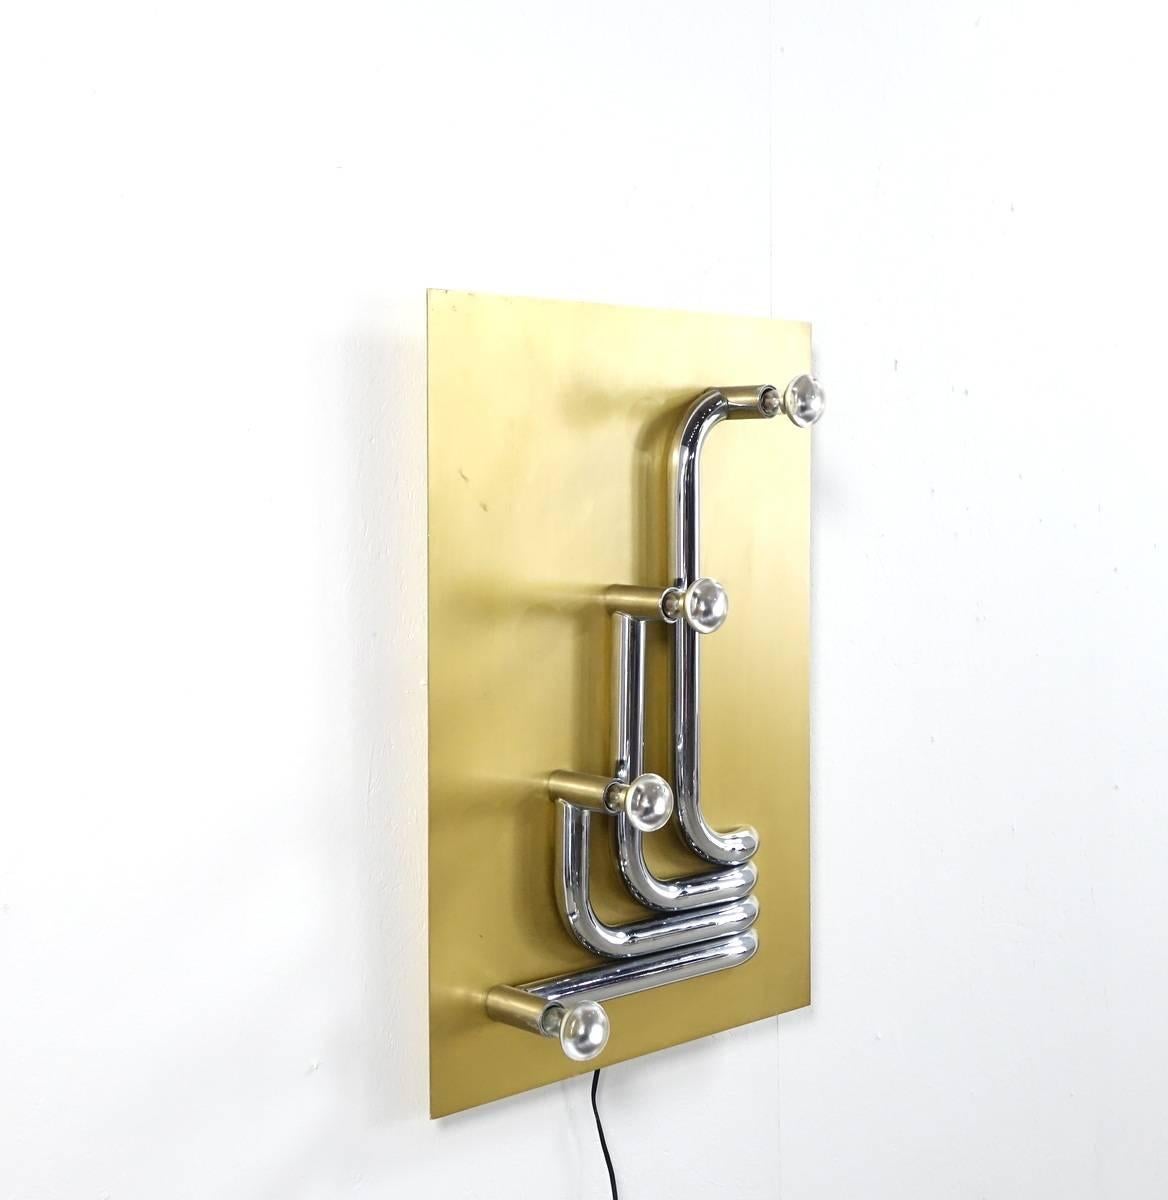 Sculptural wall lamp from the 1970s. Four chrome-plated curved metal tubes are fixed on an aluminium ground. This sculptural lamp is not only beautiful as a wall sculpture, it is also amazing when it gives light. You can hang it in four different